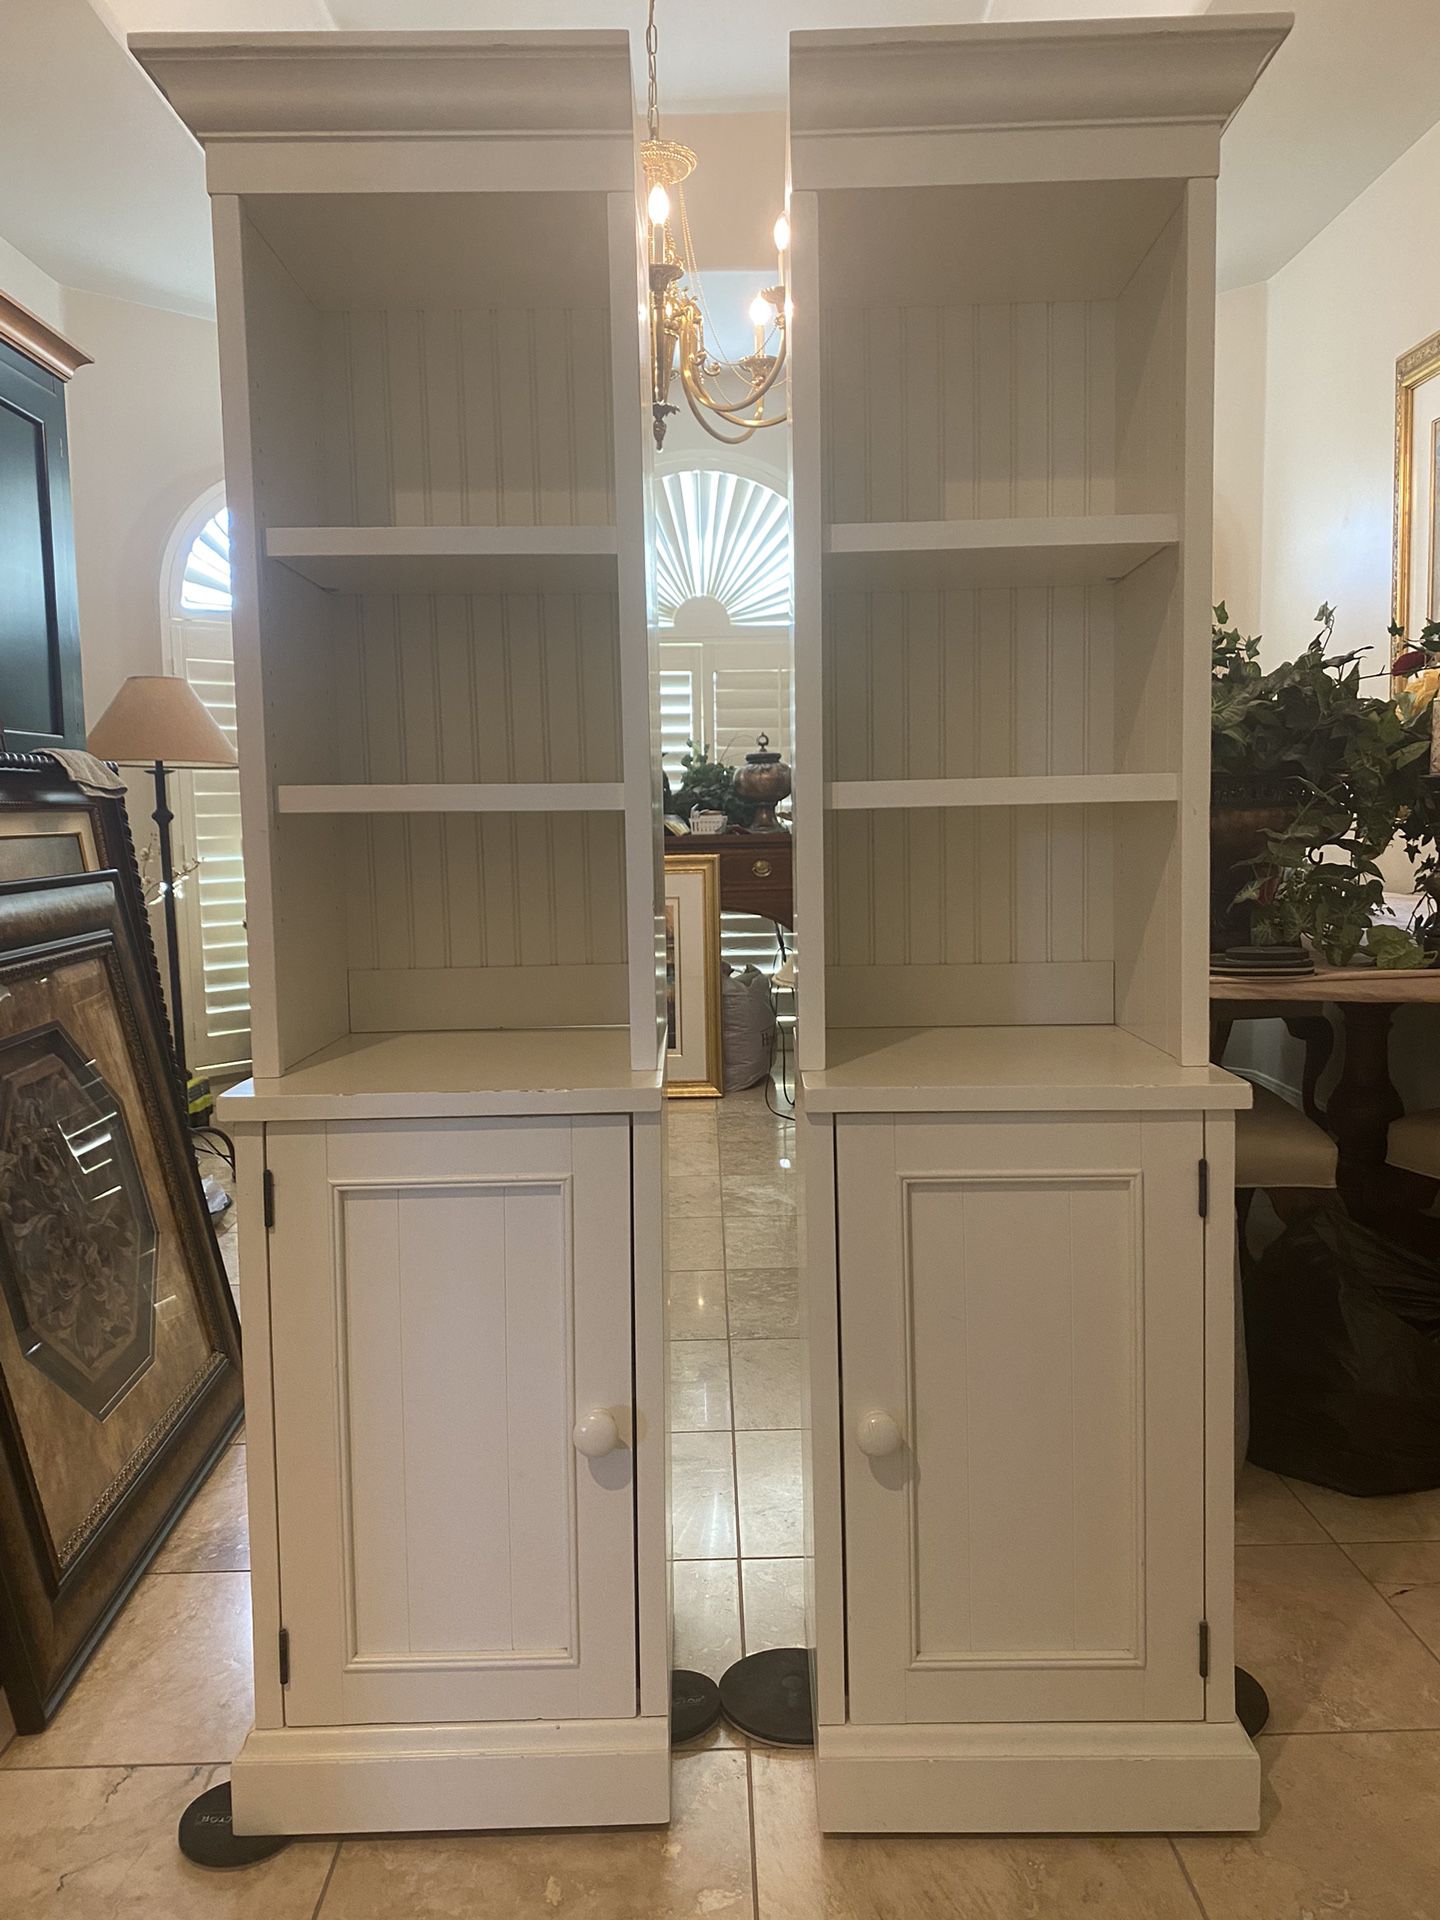 Two Storage Towers From Pottery Barn Kids